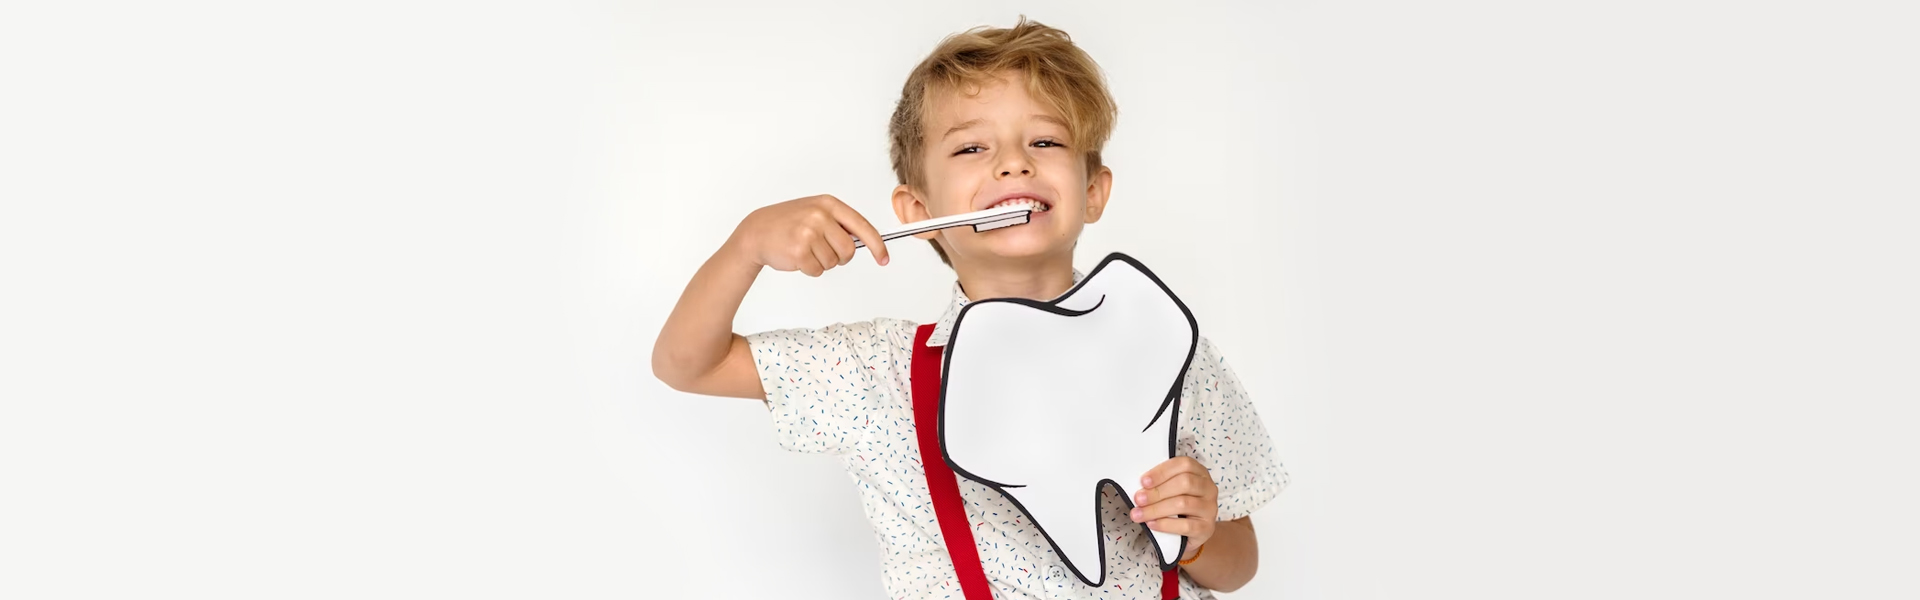 What Are The Common Dental Problems In Children?